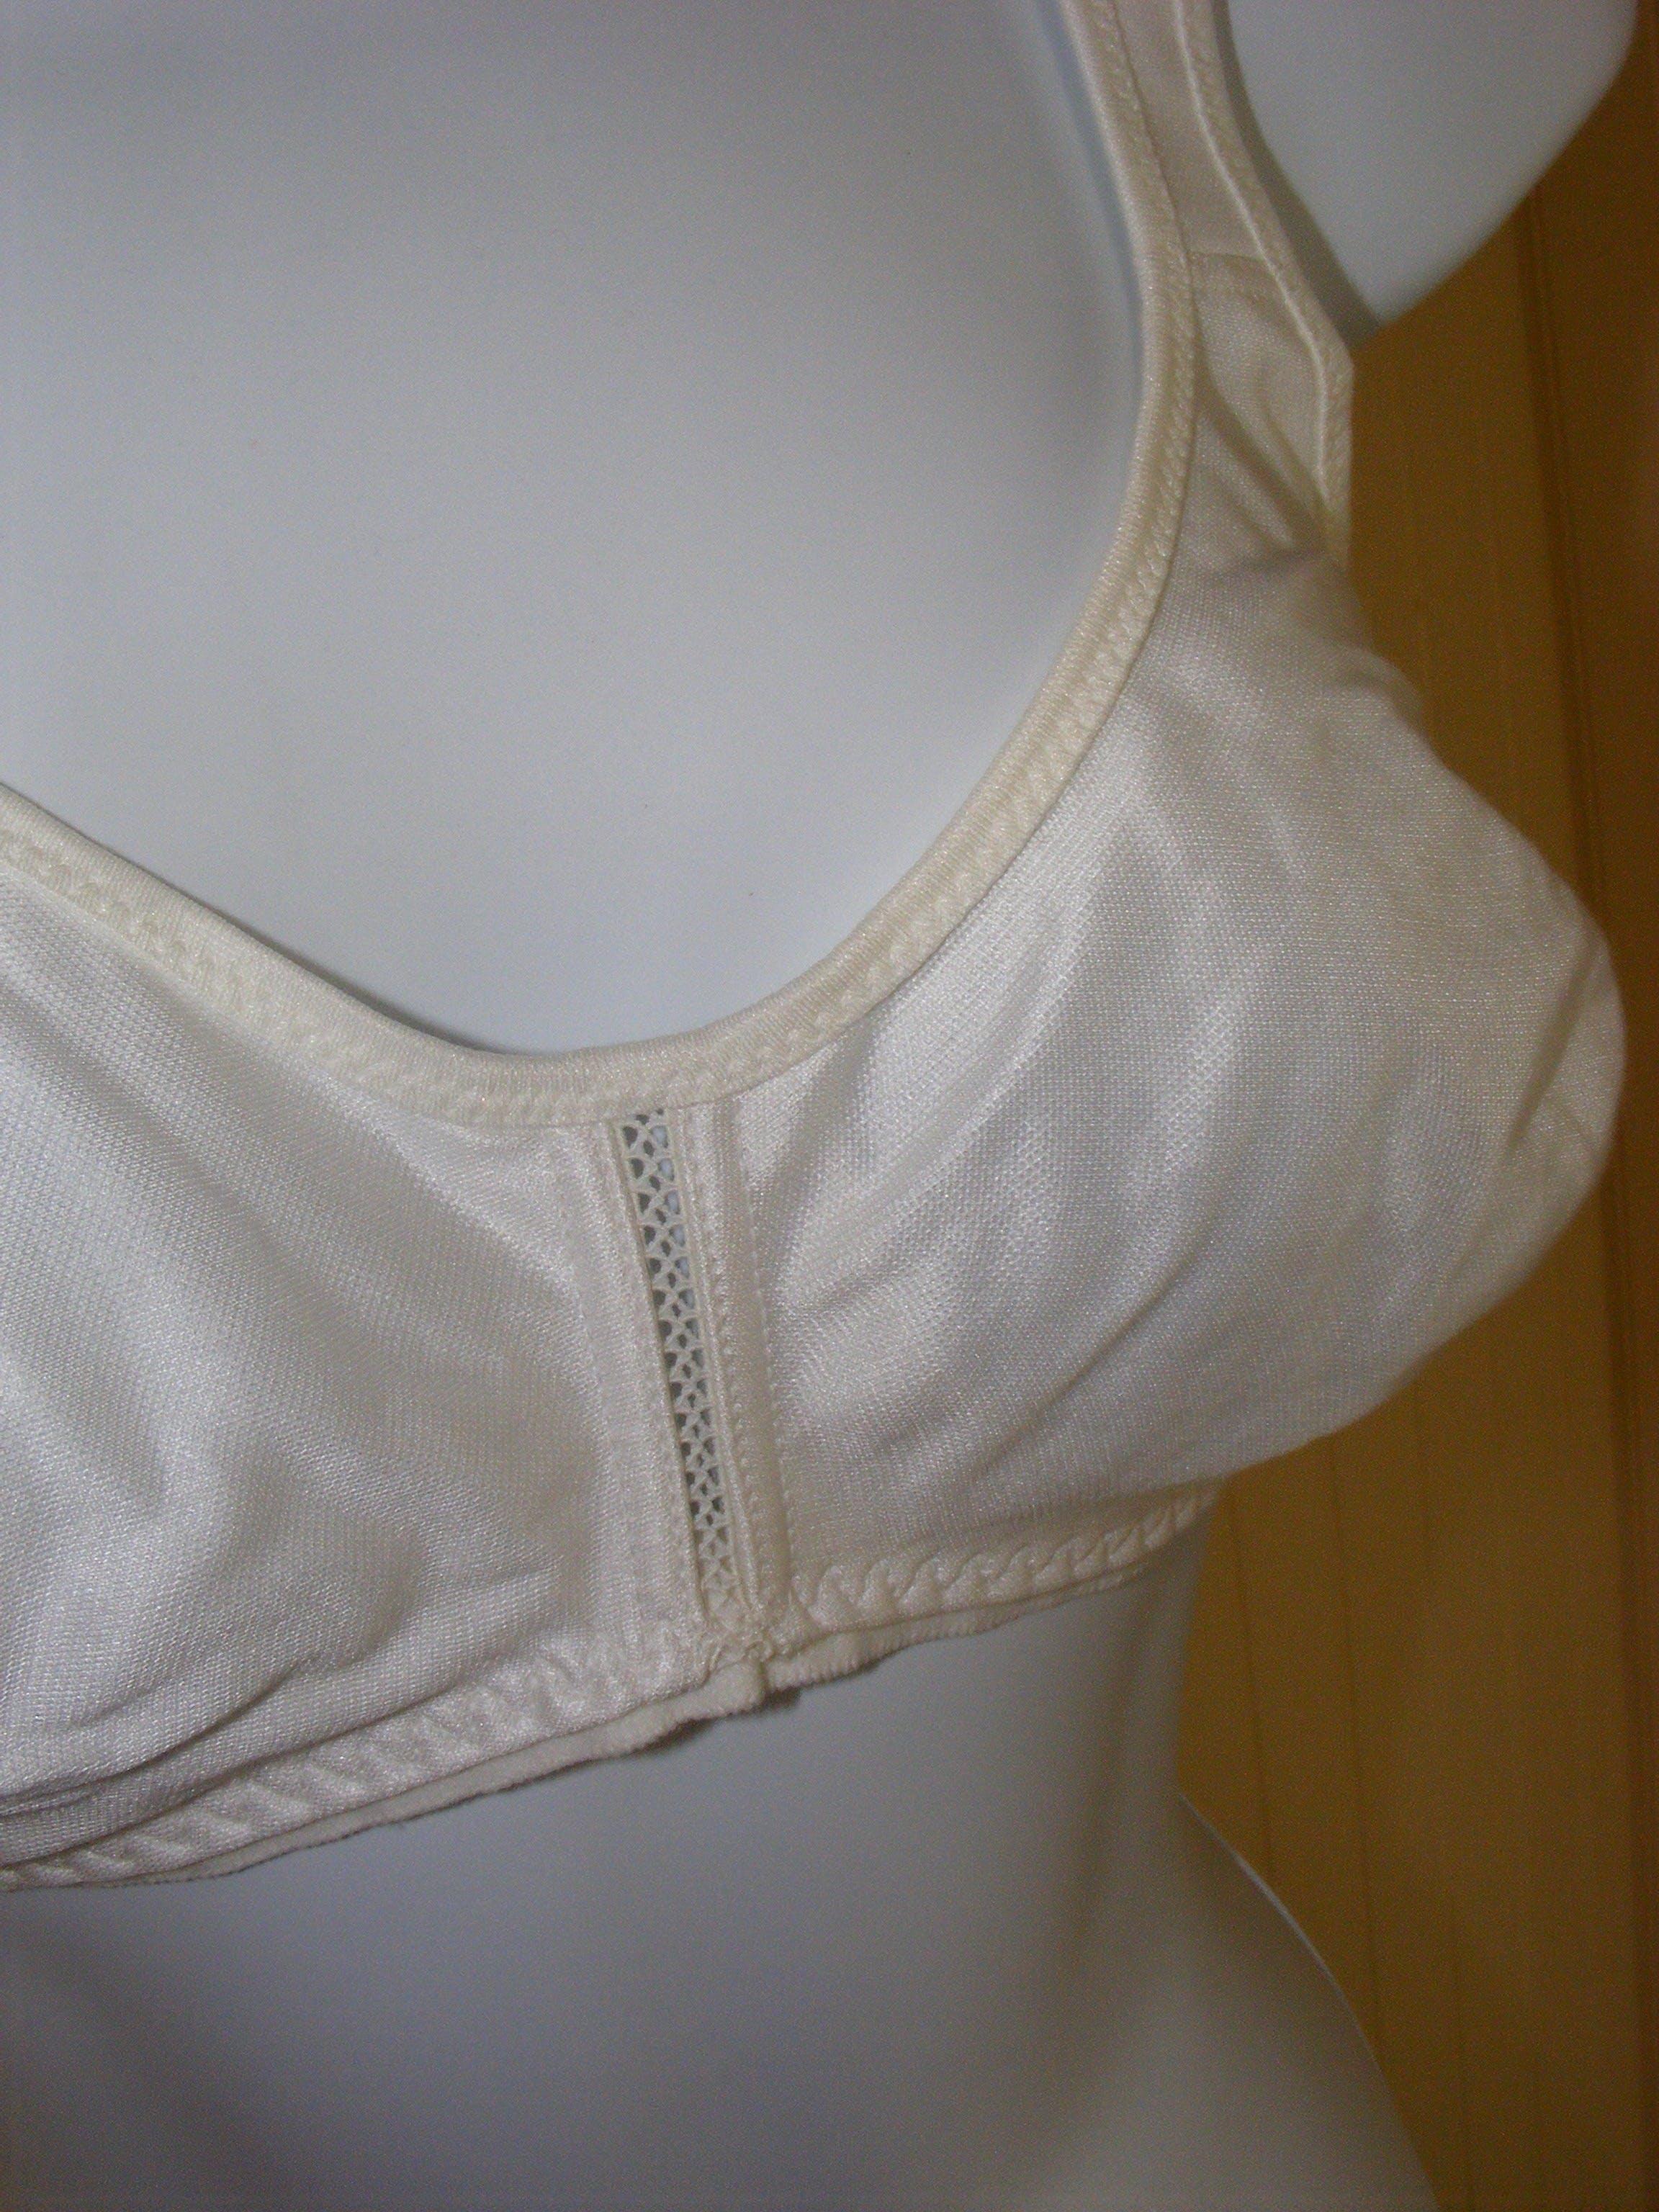 Vintage 80s Bra 38a White Soft Cup Deadstock By Sears